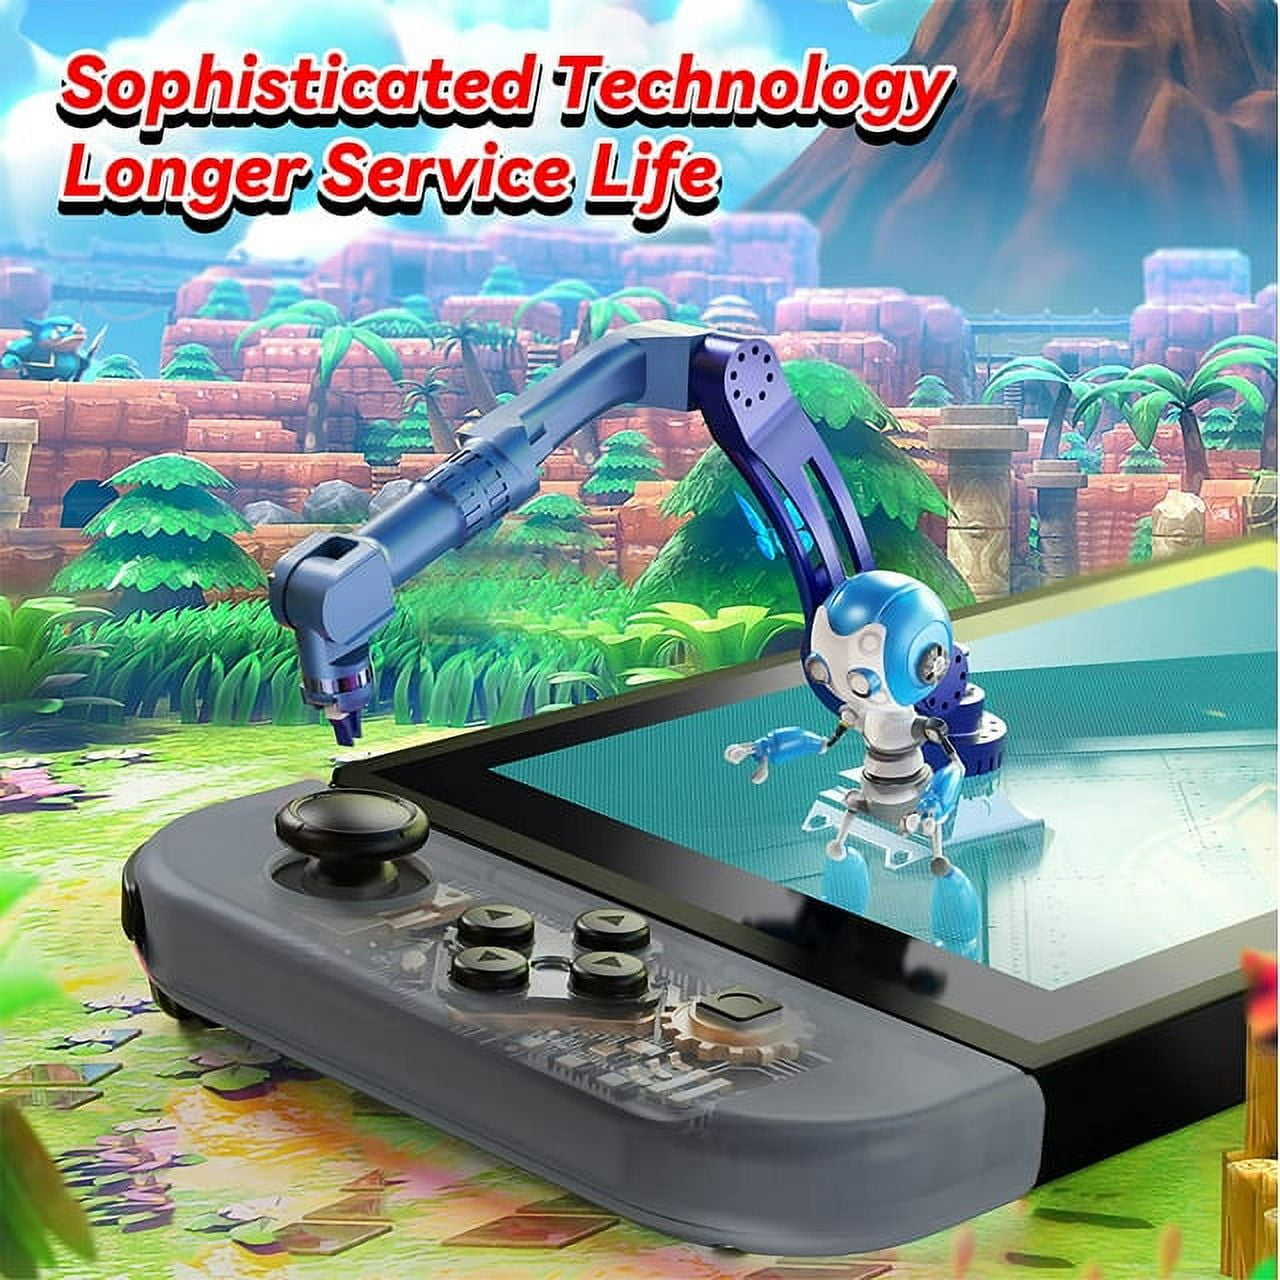 Retro handheld game console Switch JoyPad Joy Cons Joycons Controller , RPG  role-playing ACT action game, AVG adventure game - AliExpress